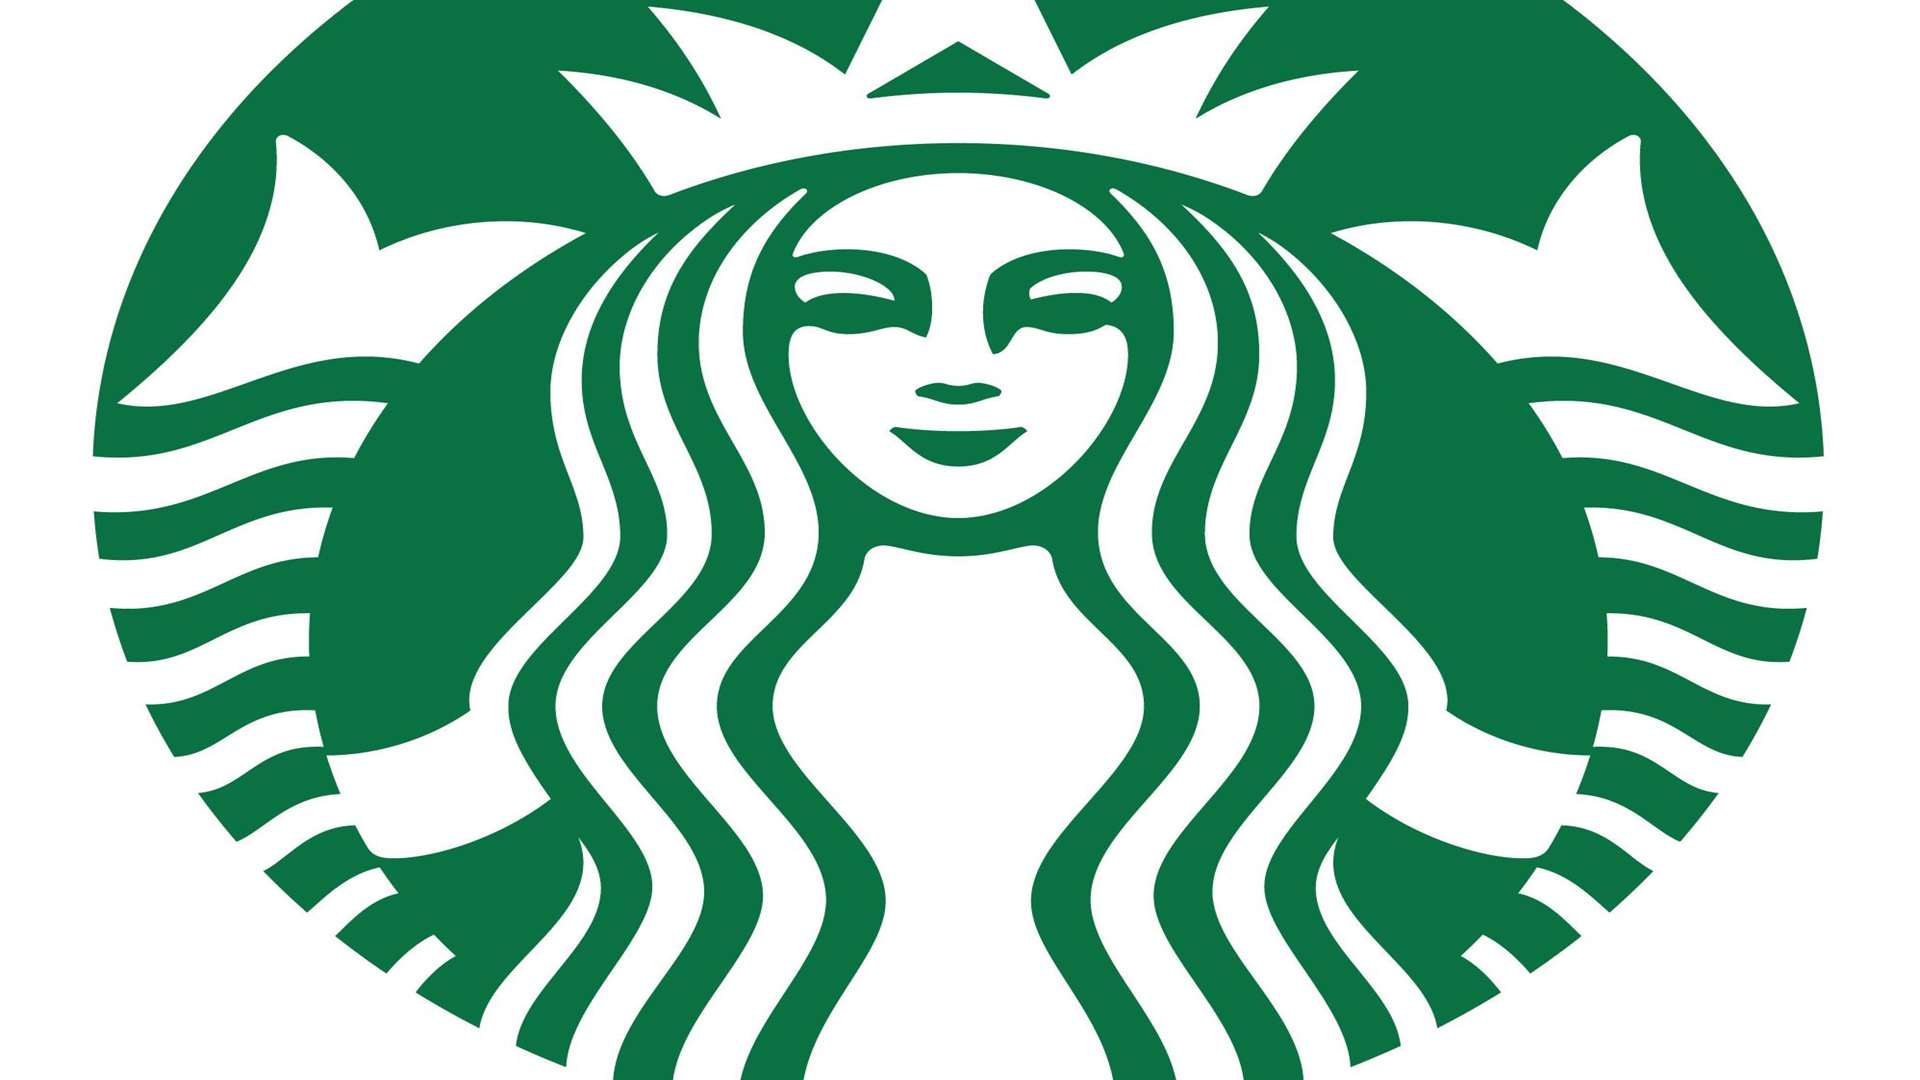 Starbucks plans to come to Maidstone